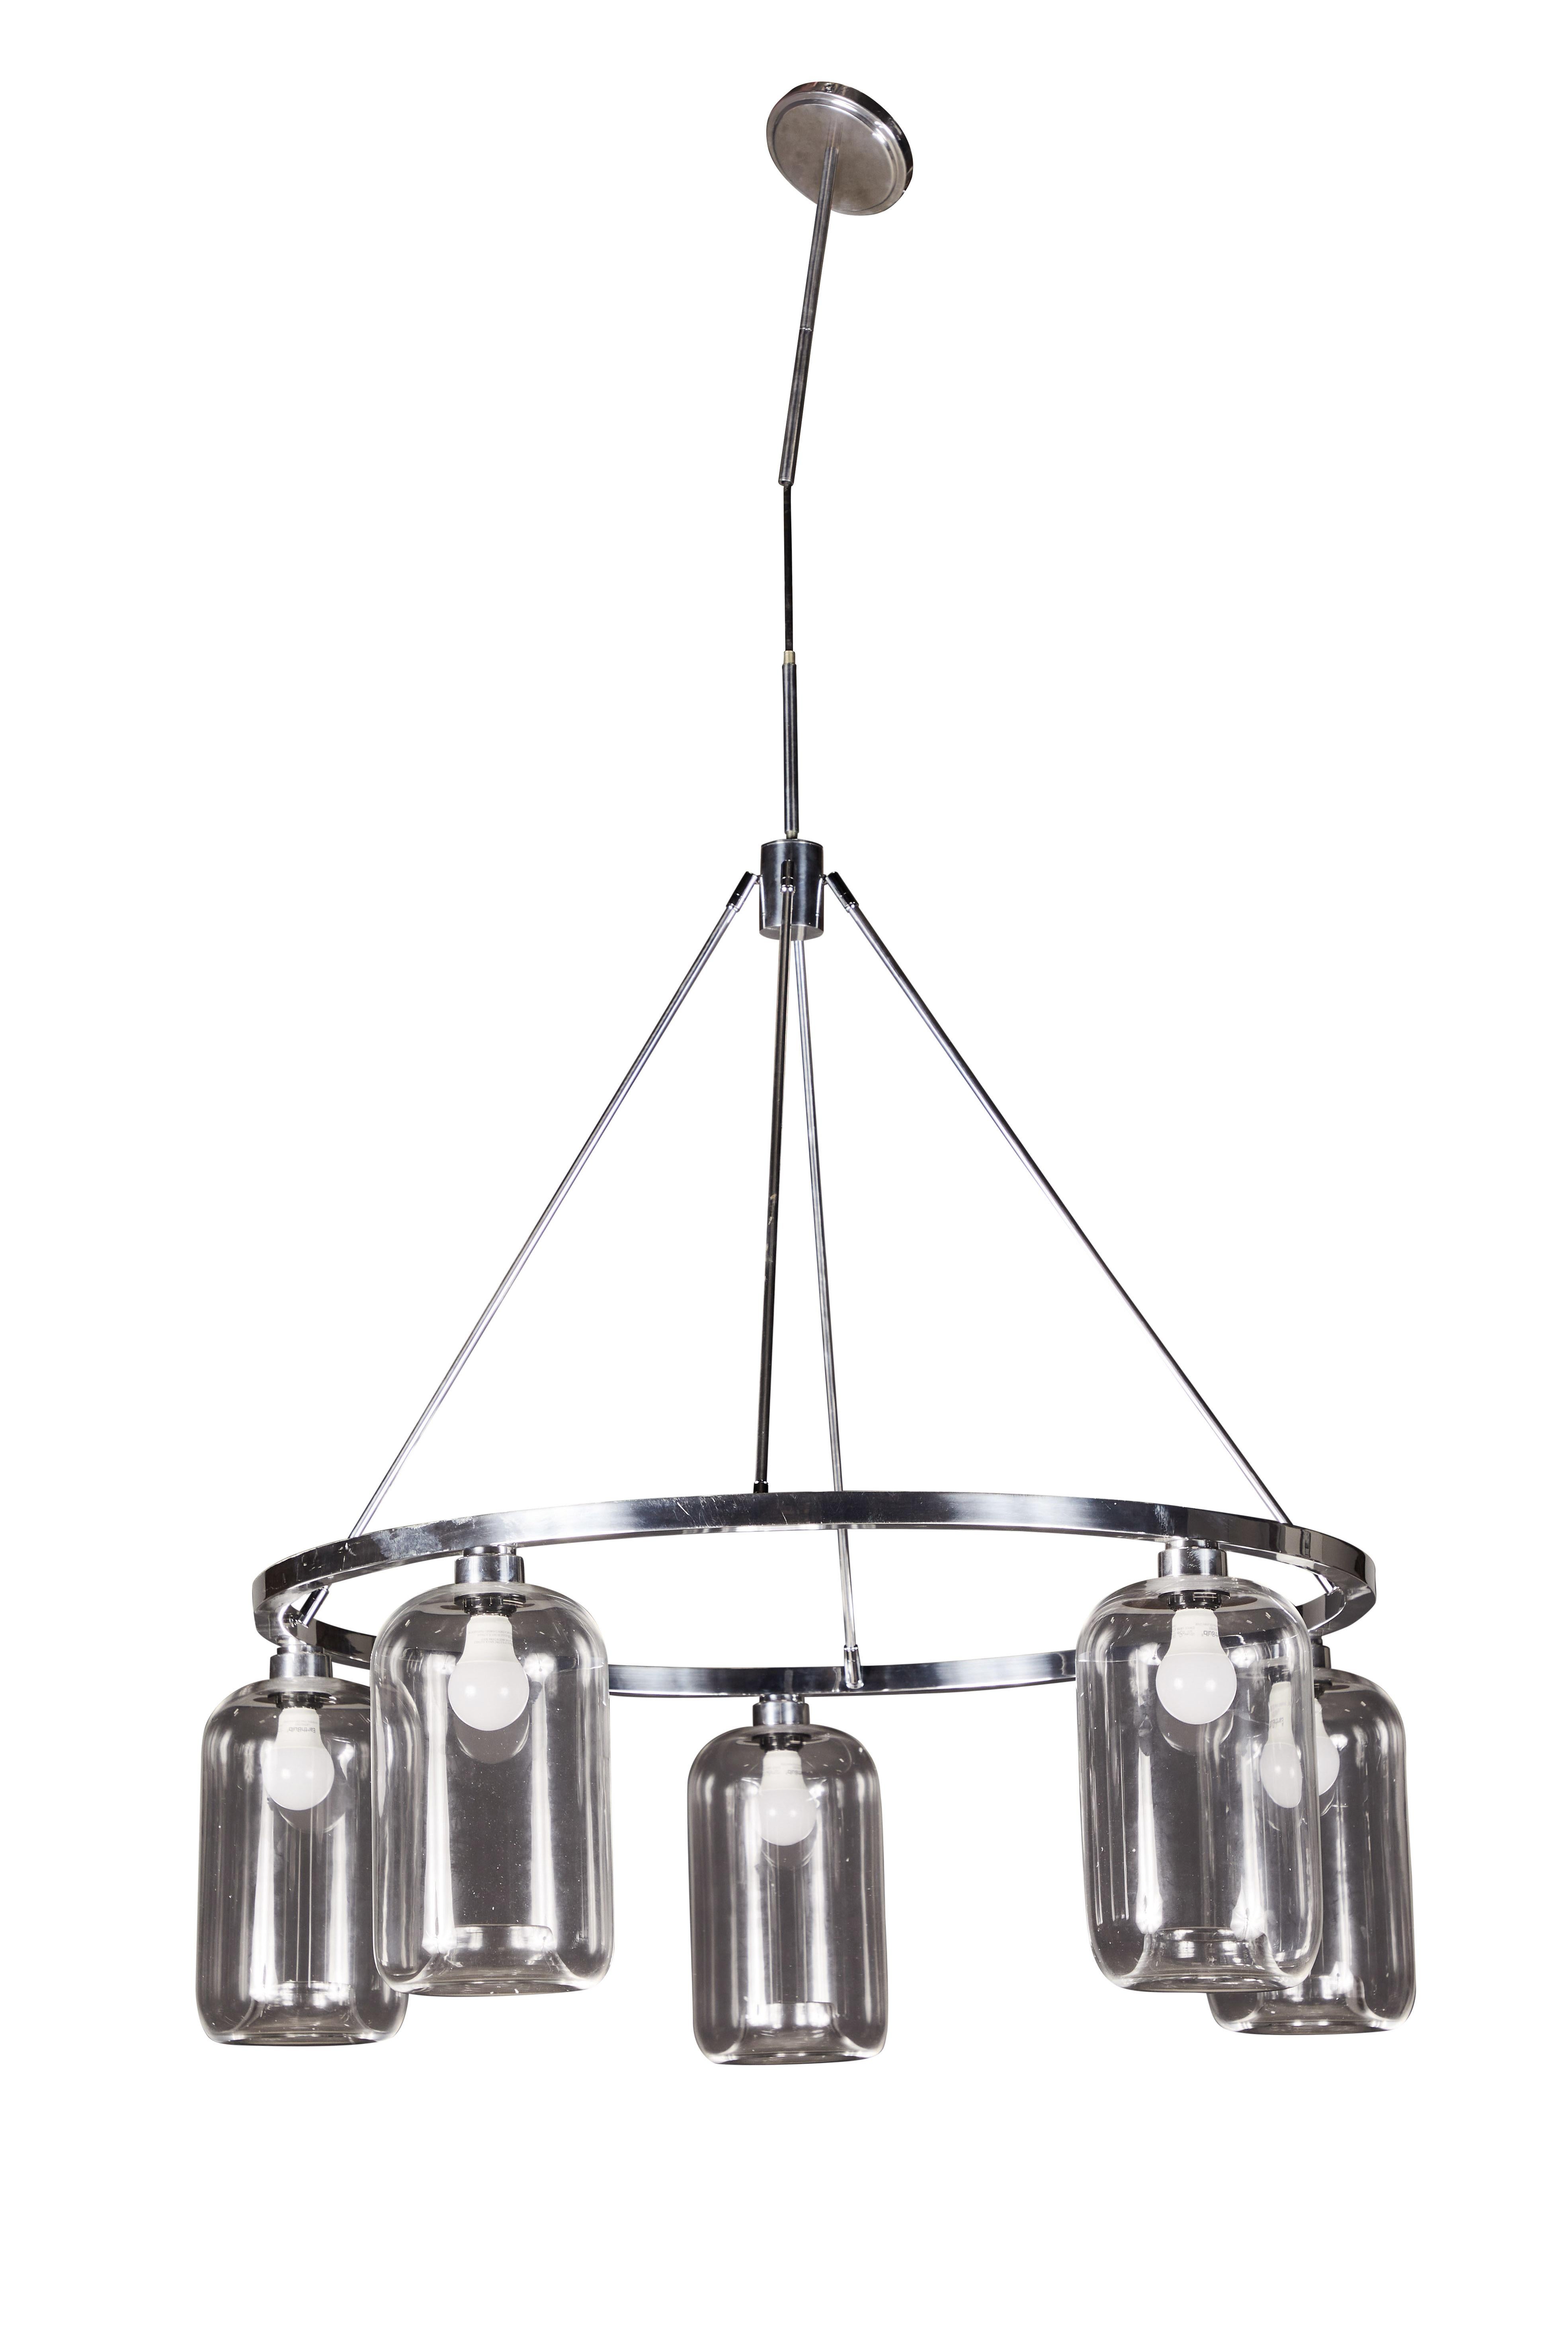 Pod clear hand blown modern glass chandelier in polished nickel by Niche

Every single glass light that comes from Niche is hand blown by real human beings in a state of the art studio located in Beacon, New York. Our team of experienced glass